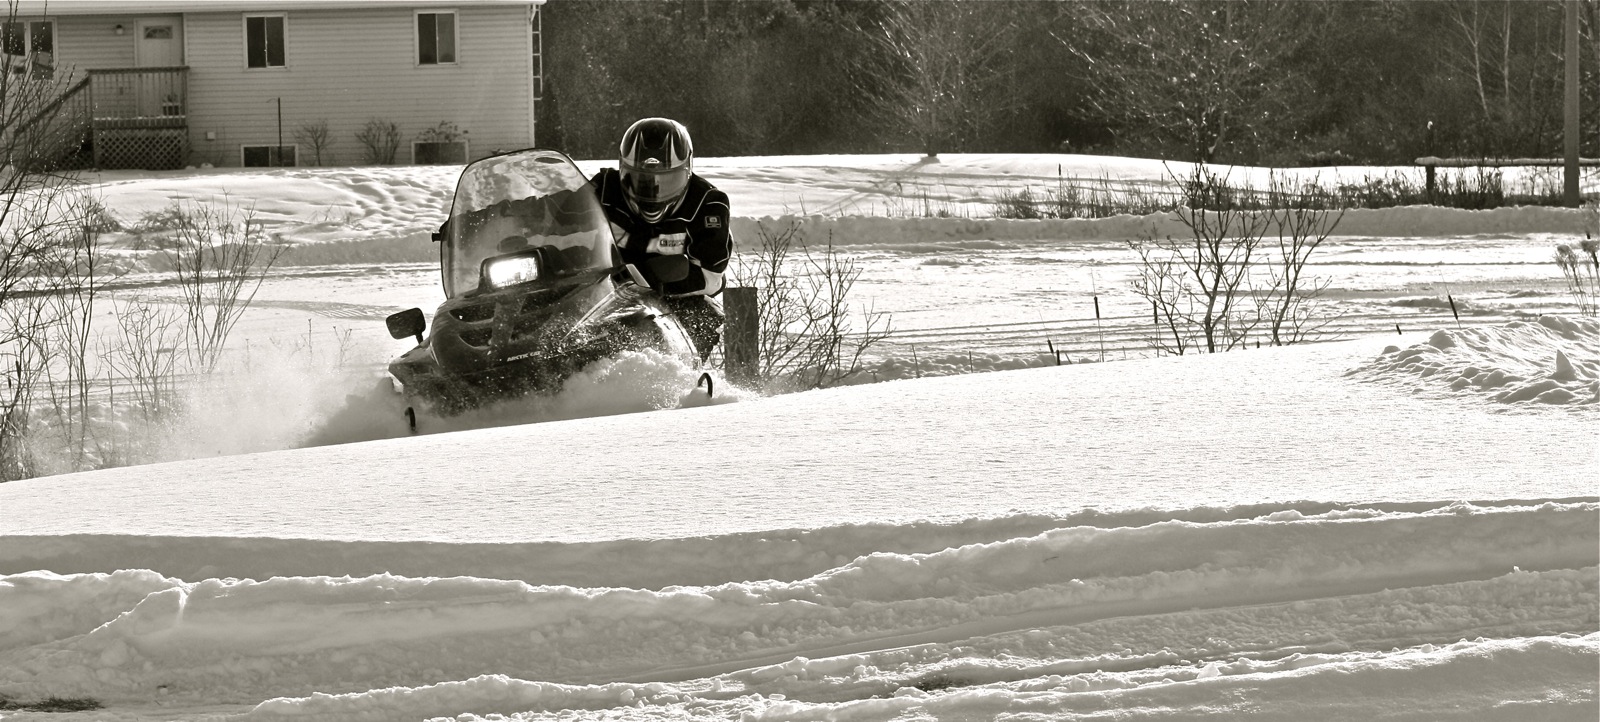 Awesome SnowMobile gallery